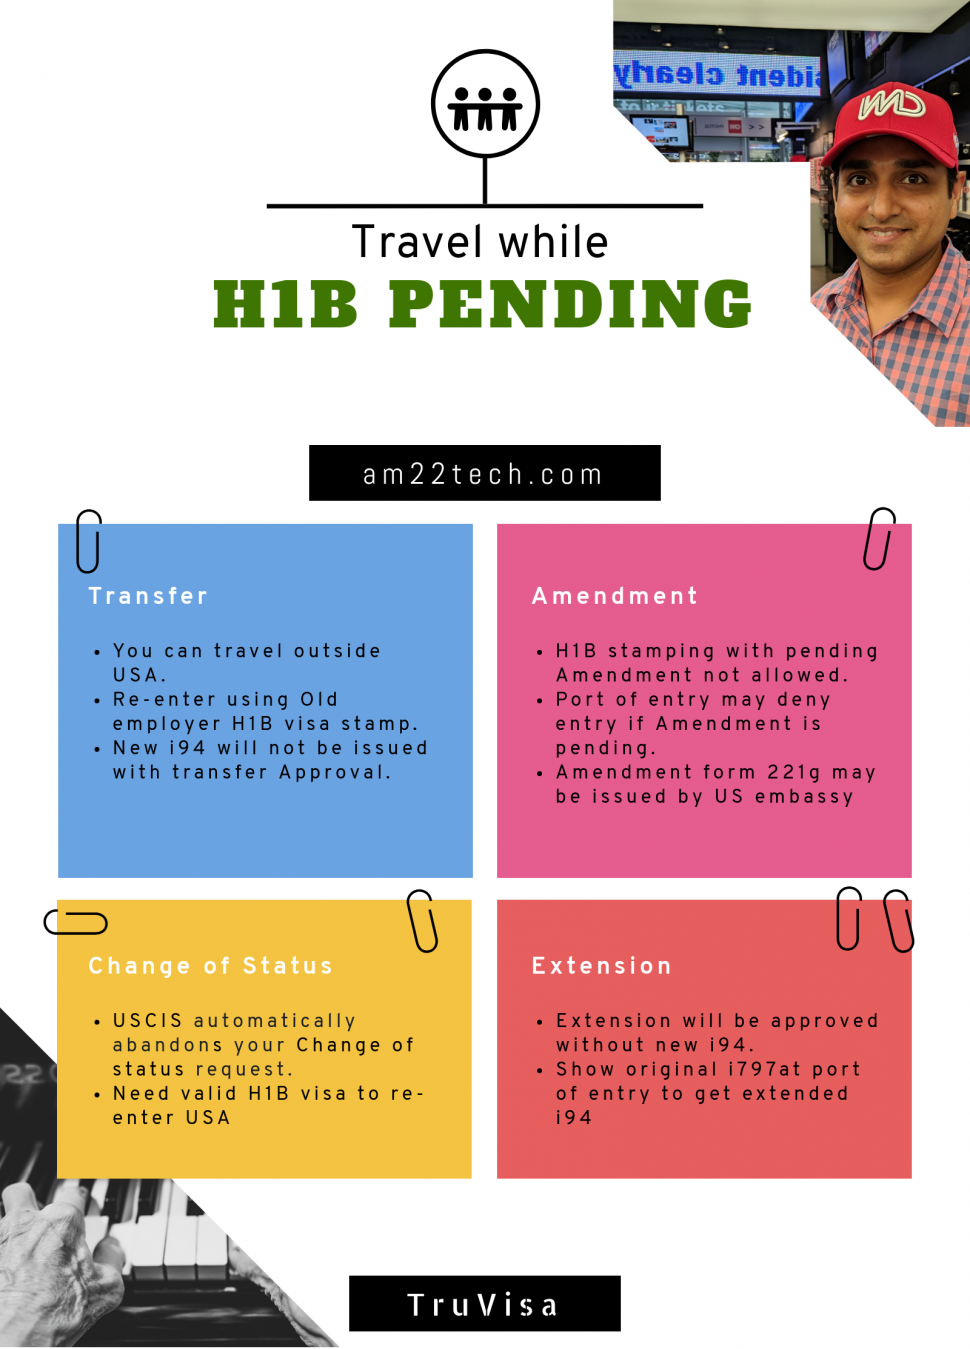 Travel risks while H1B is pending